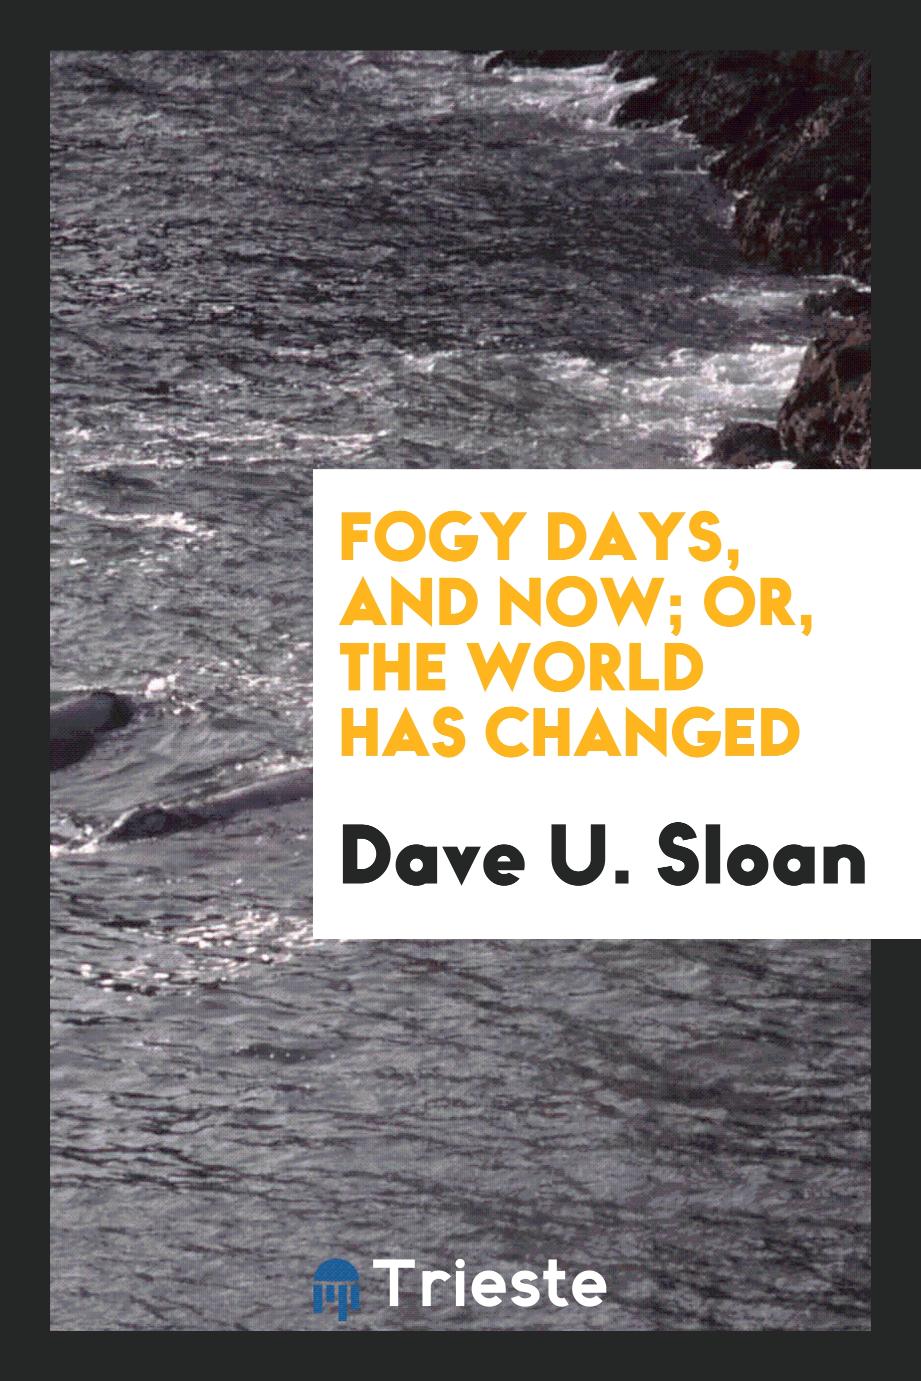 Fogy days, and now; or, the world has changed